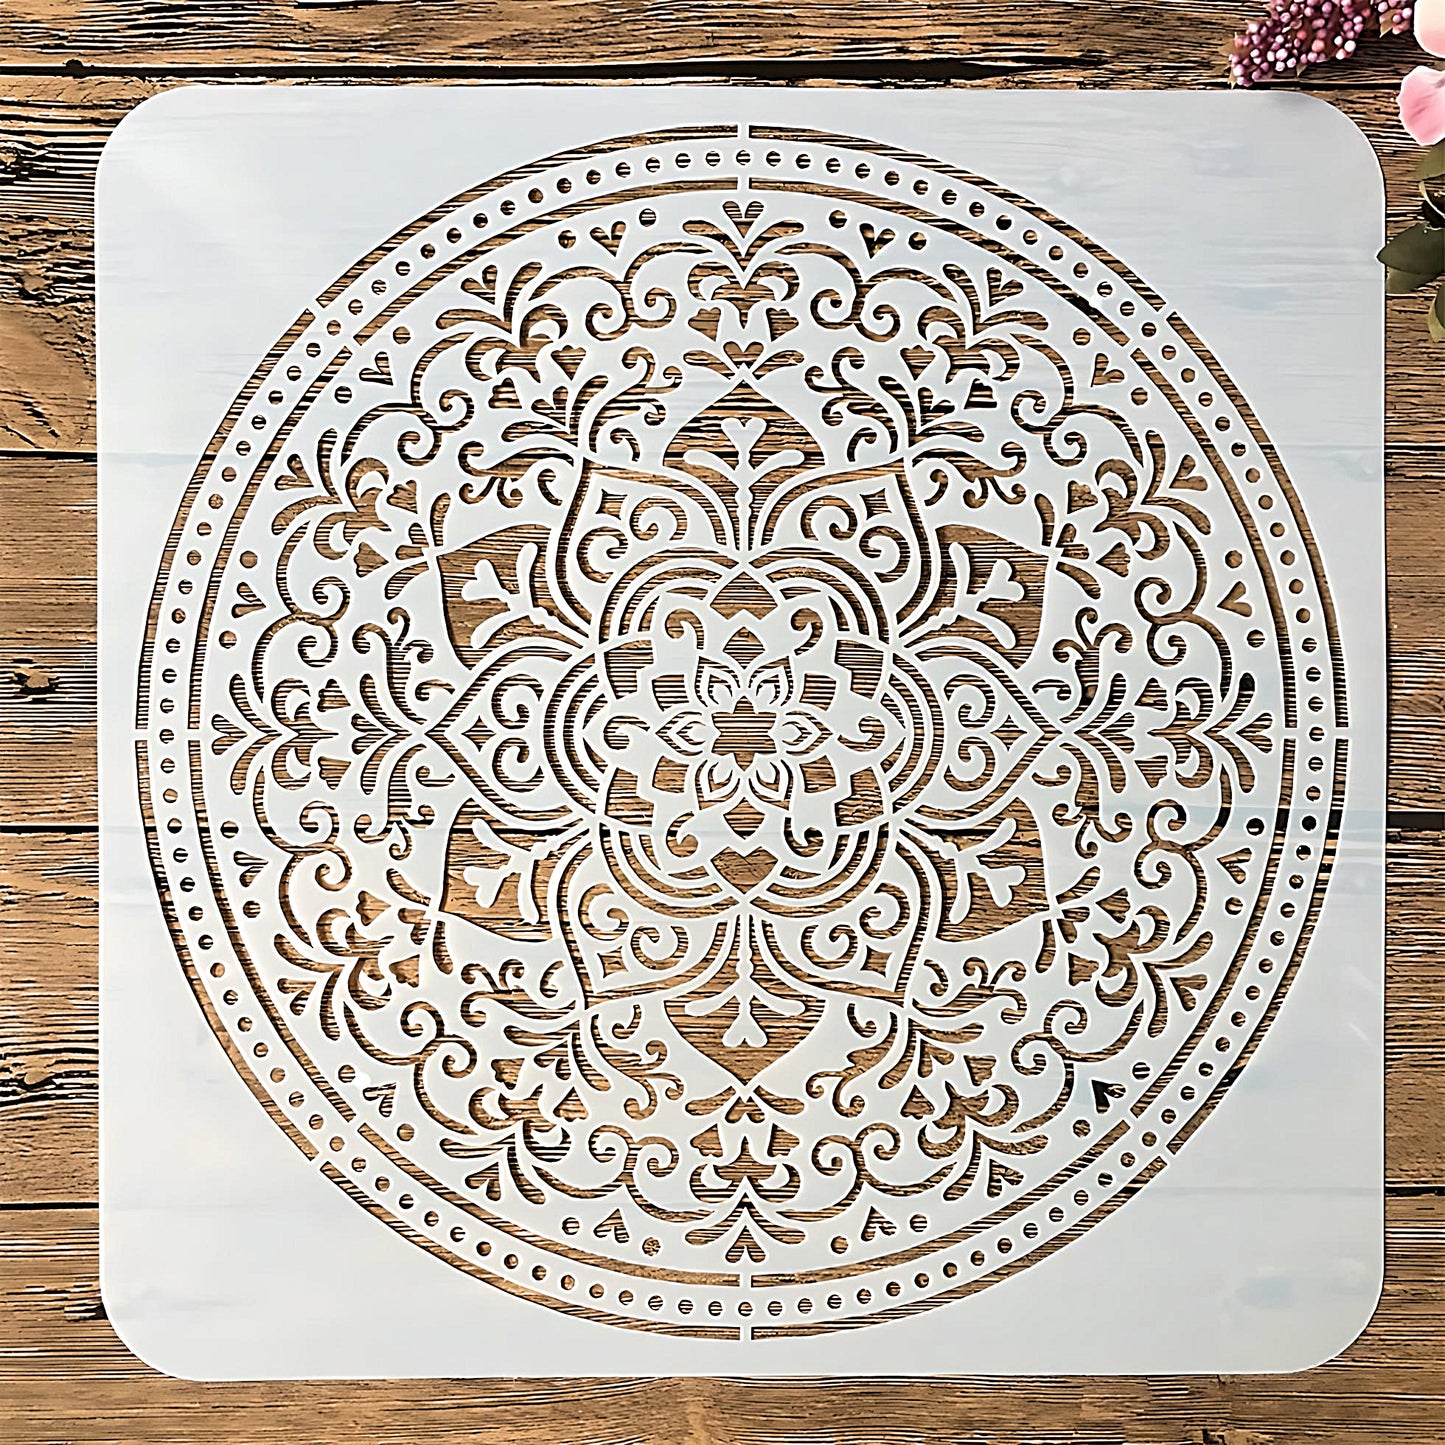 a large Mandala stencil in white color, on a wood table